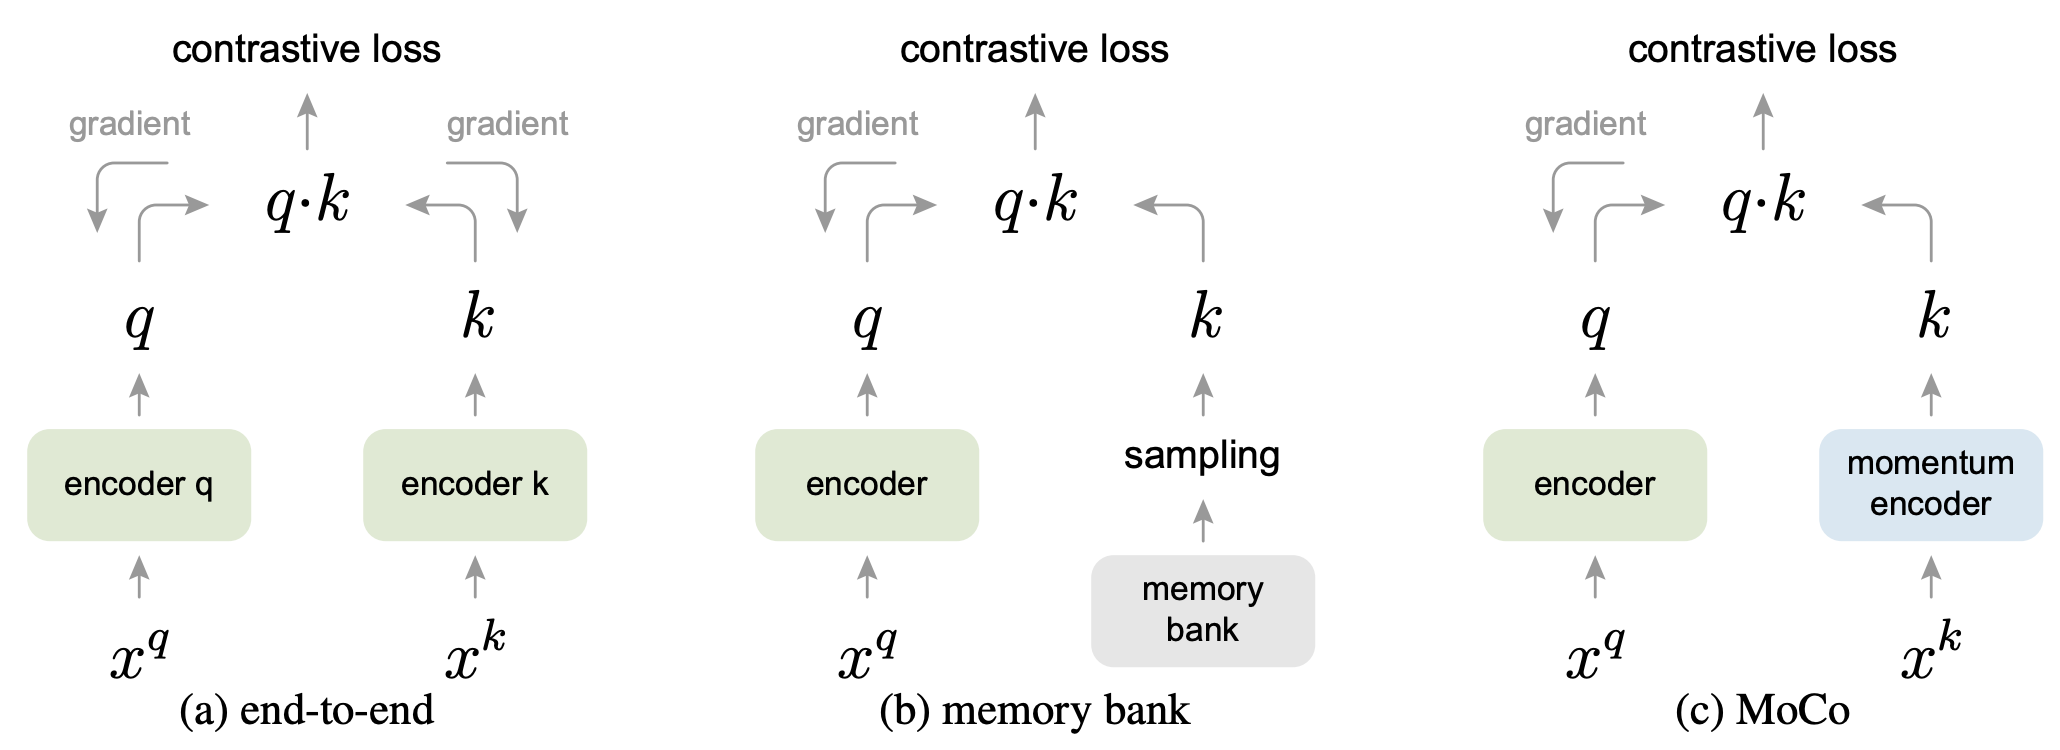 Momentum Contrast vs. other contrastive loss mechanisms (Source: Momentum Contrast for Unsupervised Visual Representation Learning (2019))